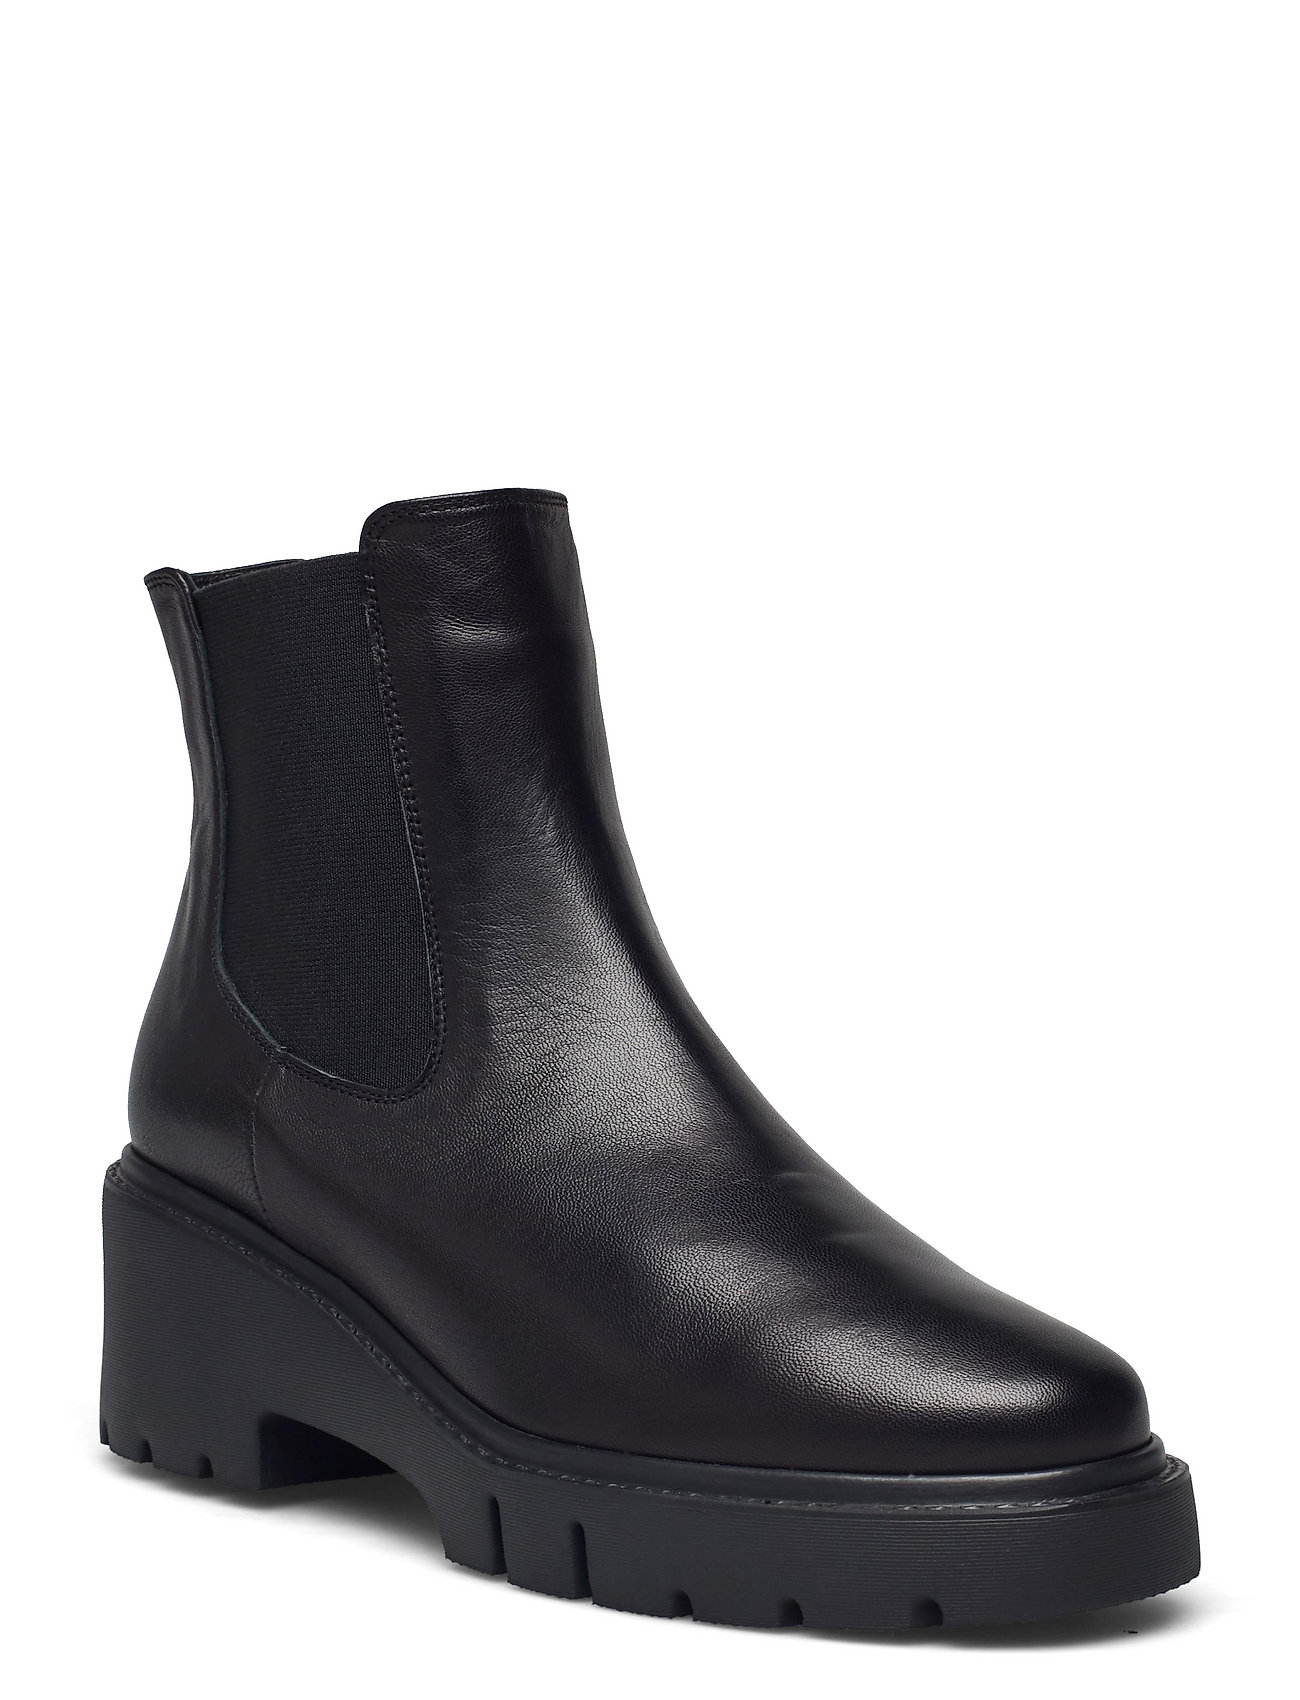 Jerome_f21_vu Shoes Boots Ankle Boots Ankle Boot - Flat Musta UNISA